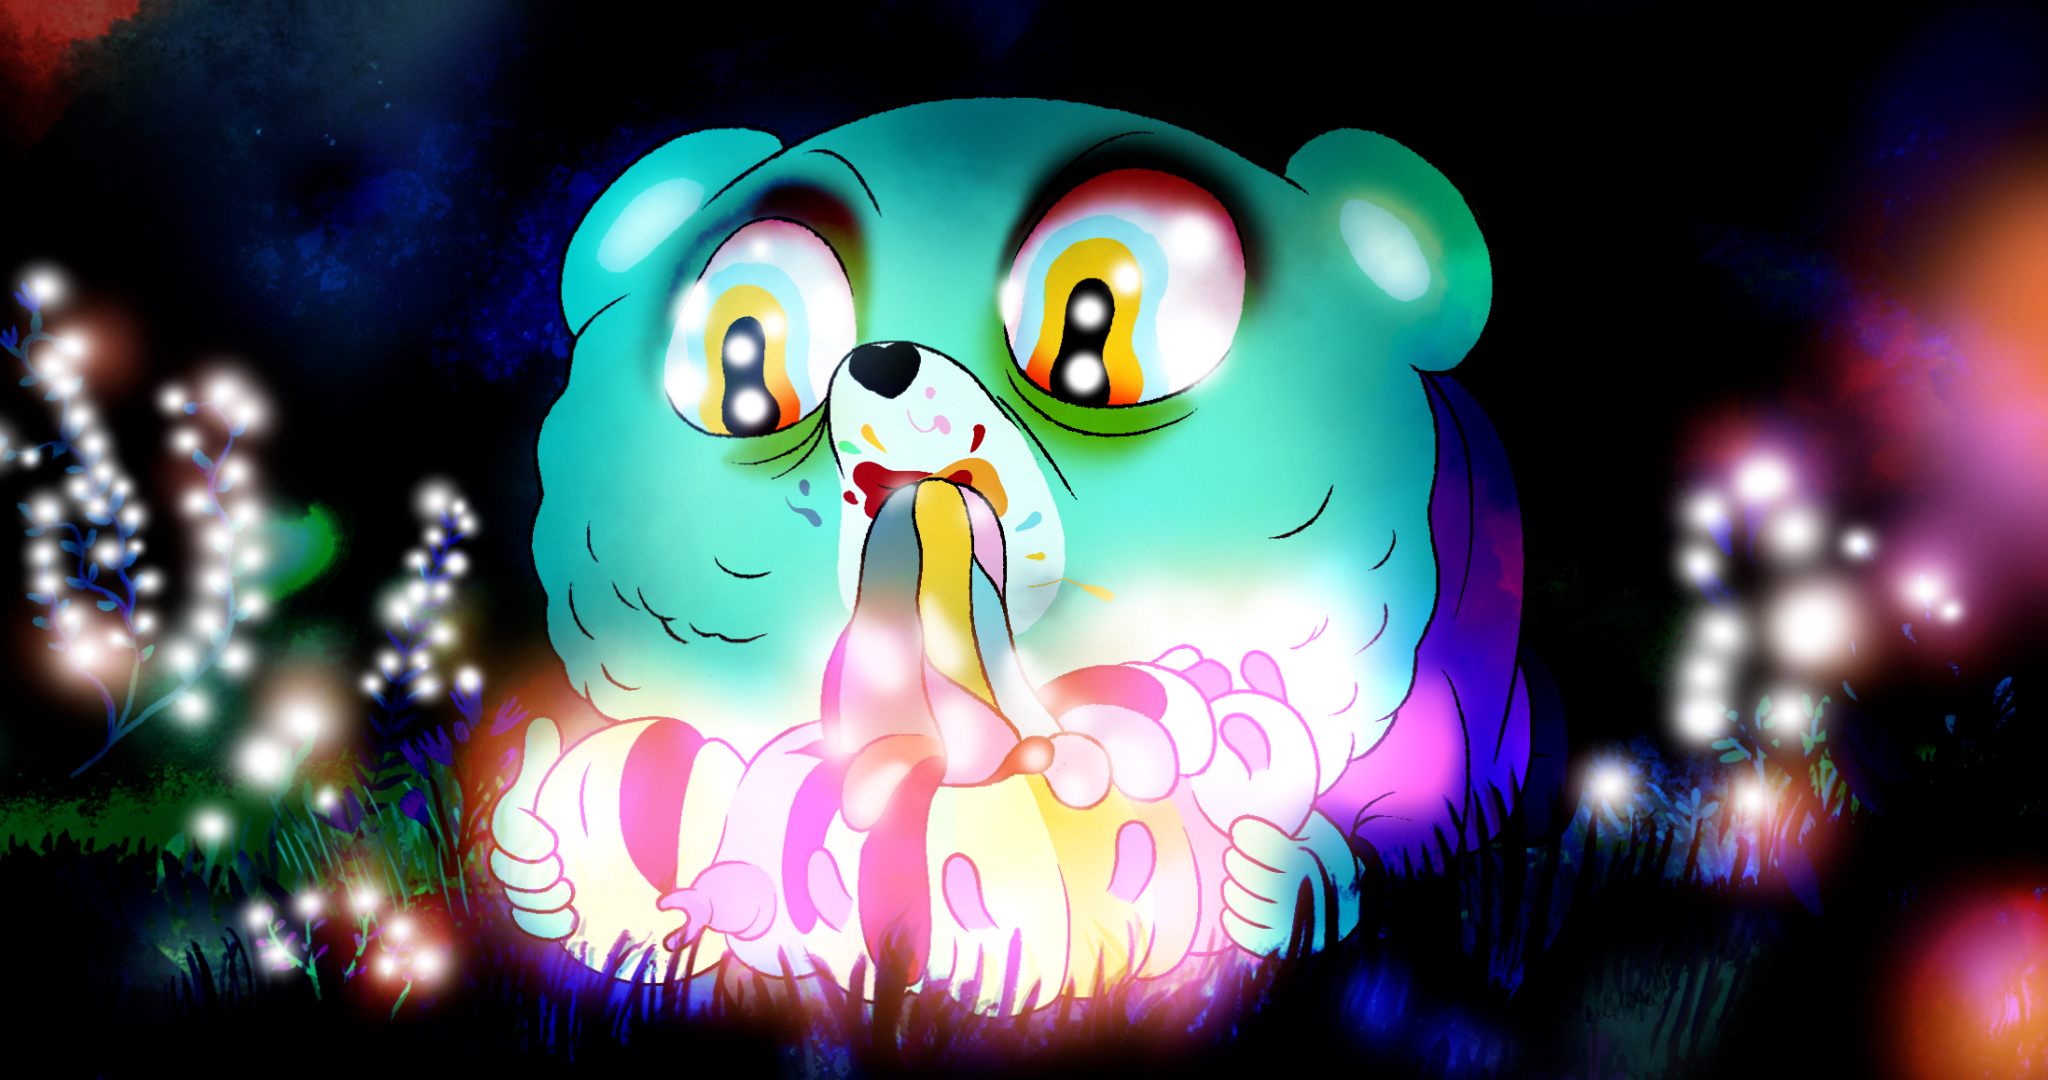 A bloated, wild-eyed blue teddy bear devours the pastel guts of a rainbow-colored caterpillar in a hallucination sequence from the animated feature Unicorn Wars